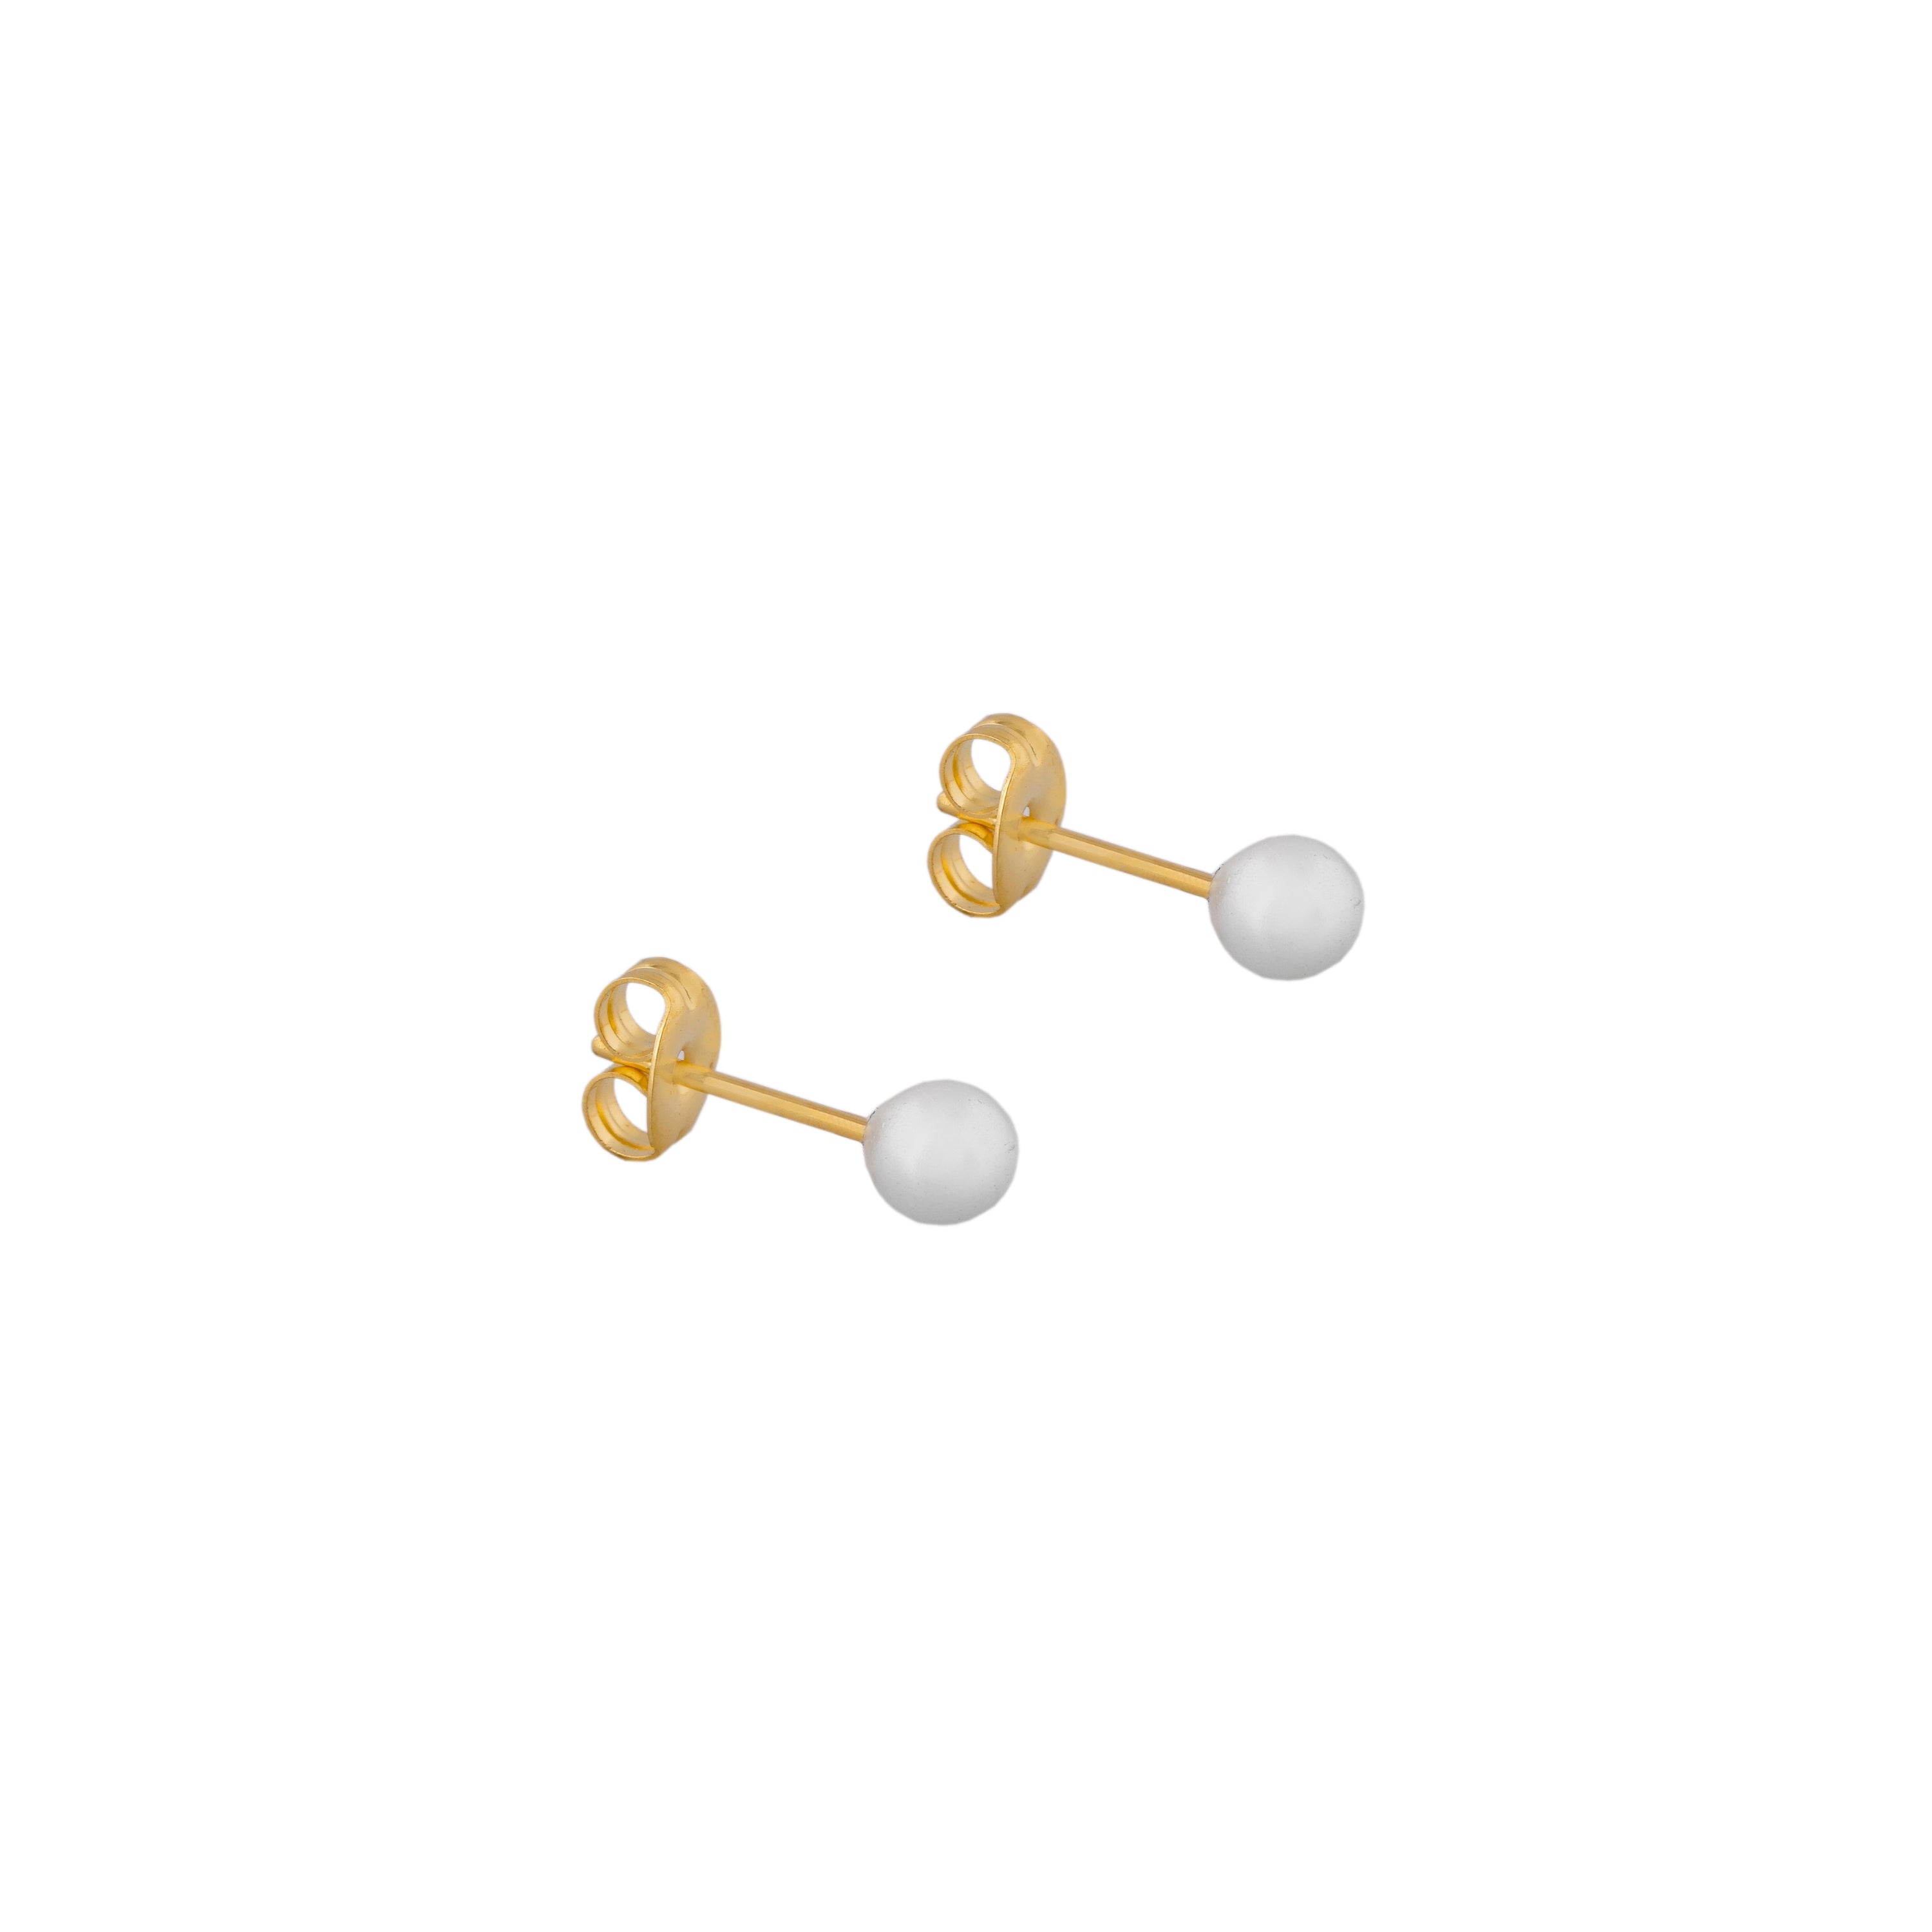 5MM White Pearl 24K Pure Gold Plated Ear Studs | MADE IN USA | Ideal for everyday wear